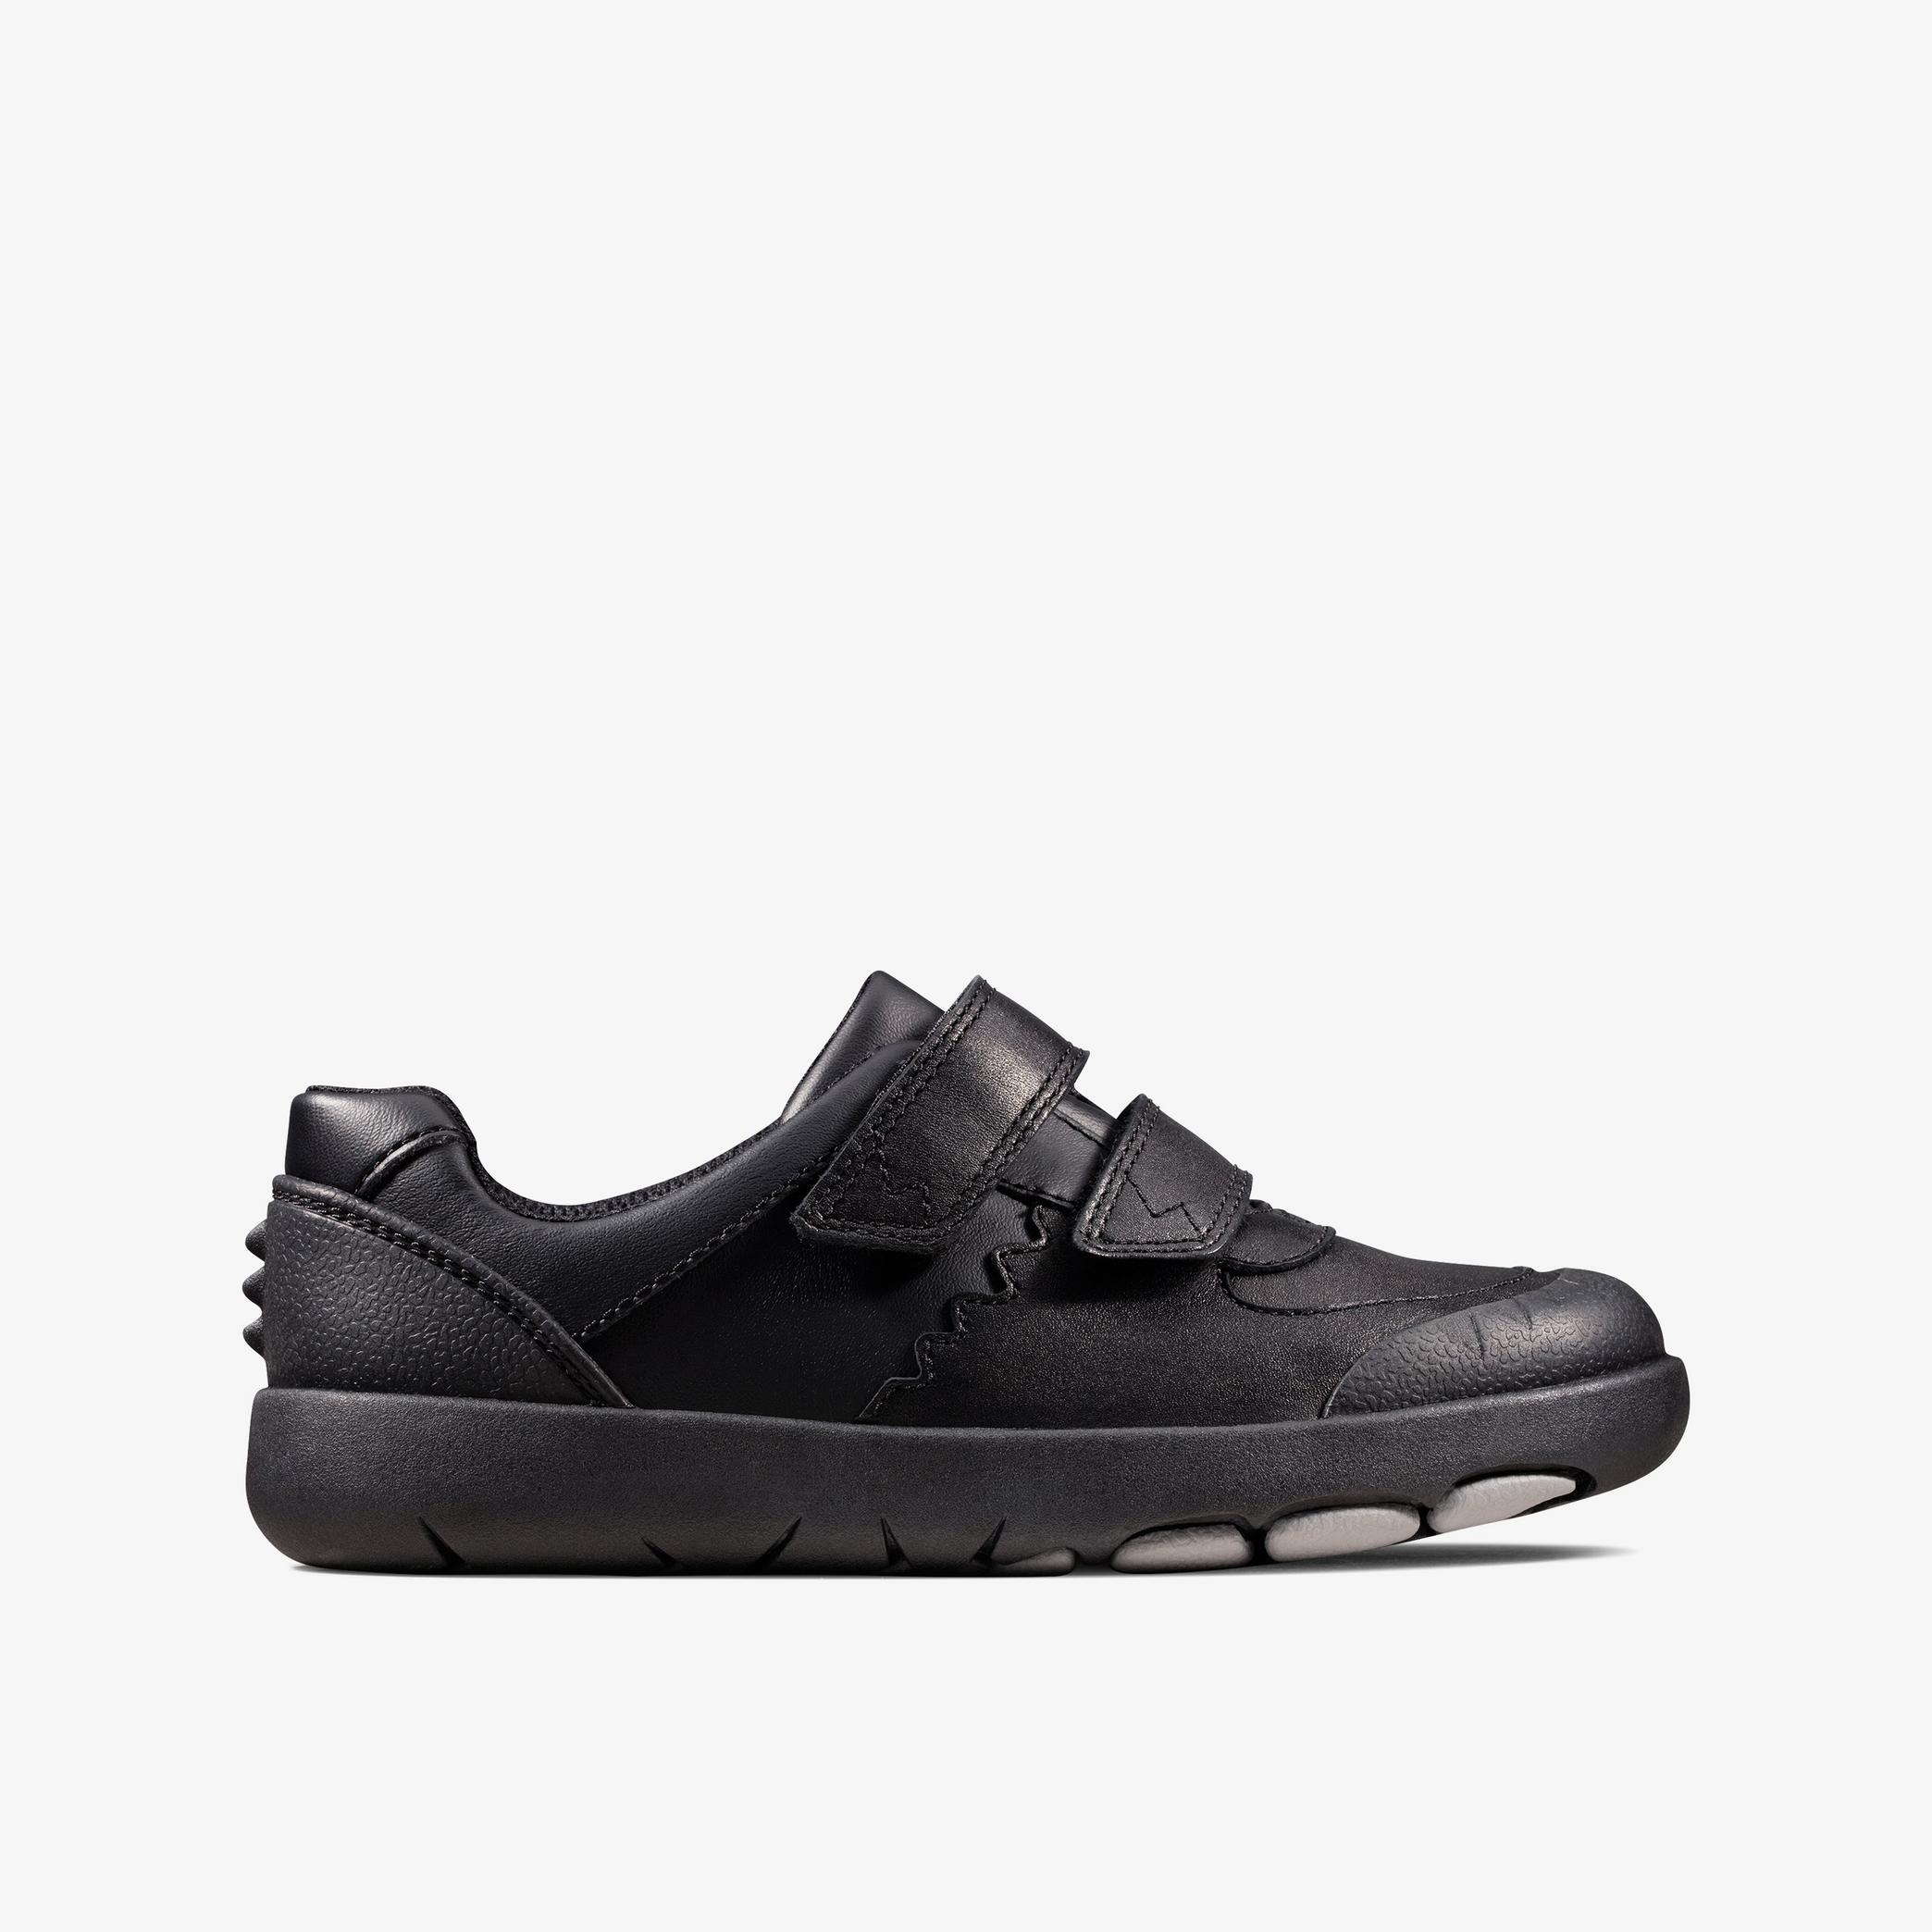 Rex Pace Kid Black Leather Shoes, view 1 of 6